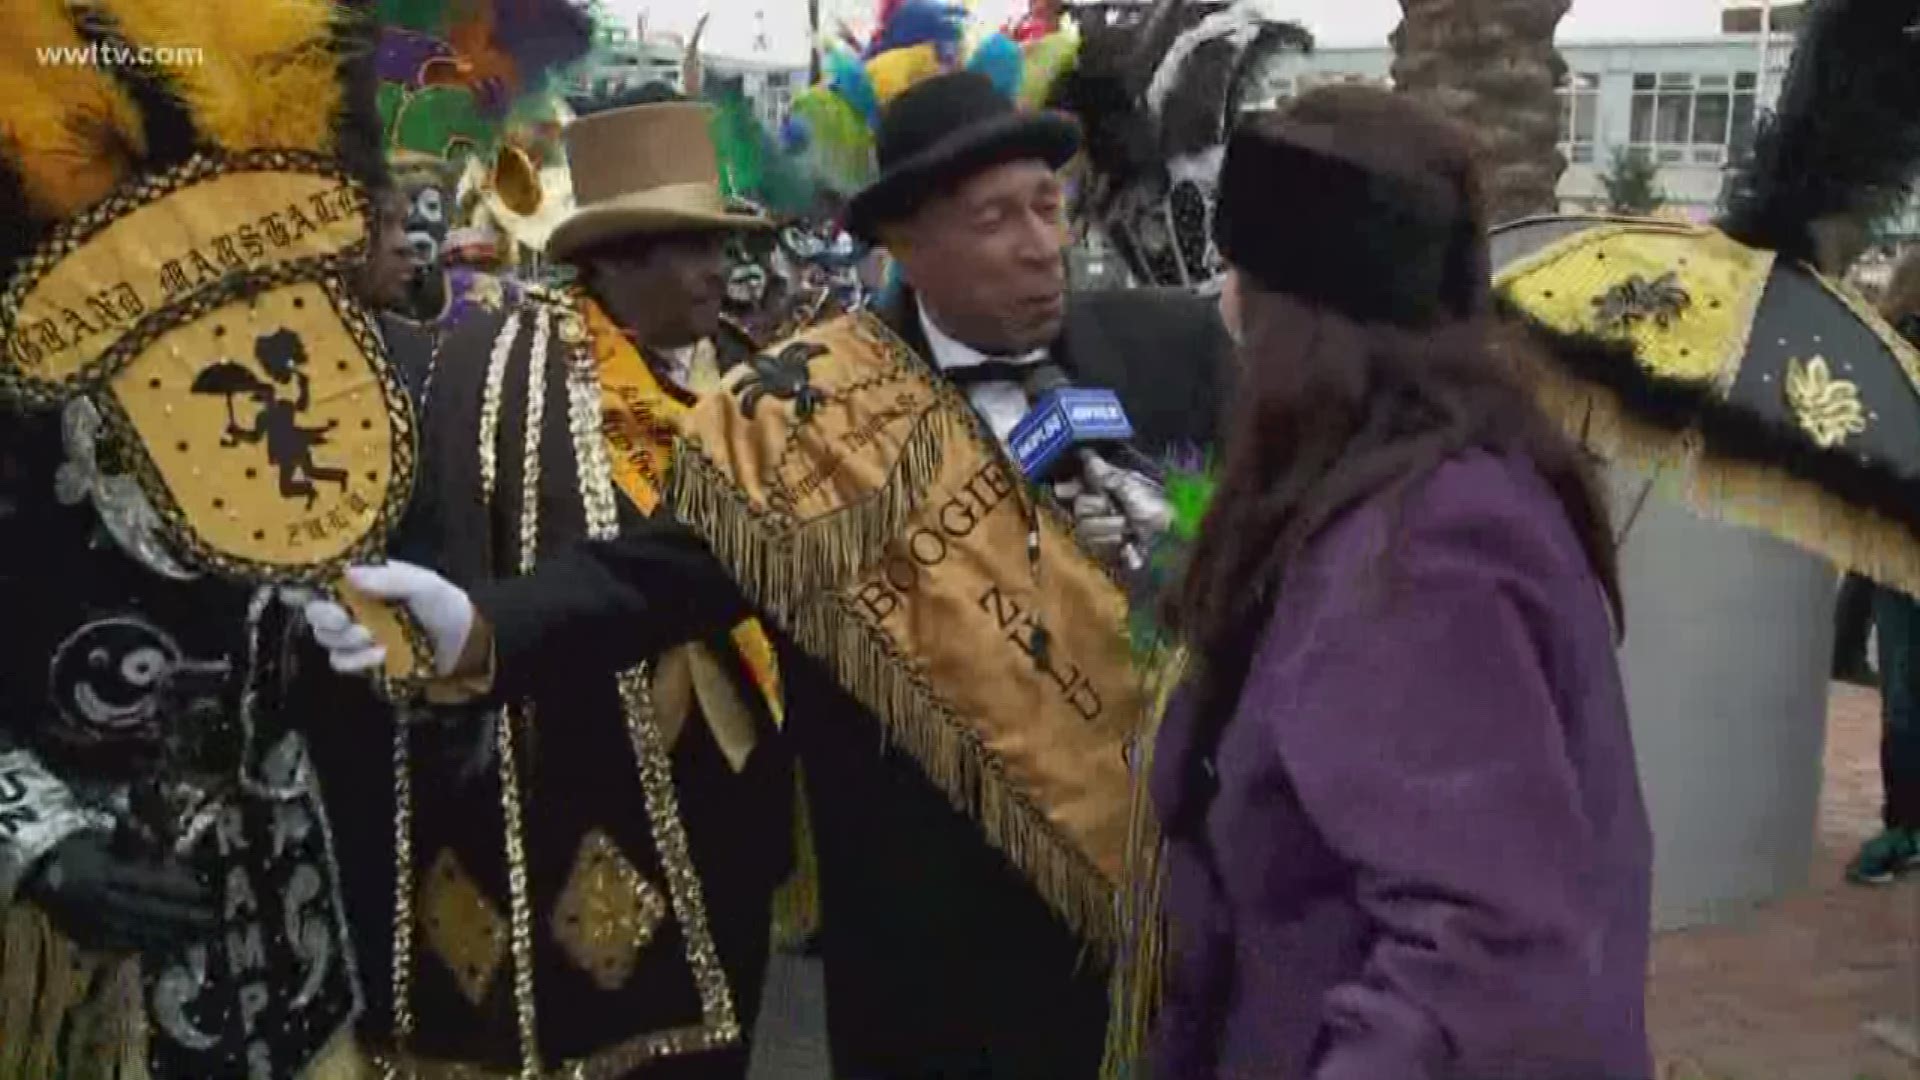 "We gonna have a happy Mardi Gras!" one Zulu member said as he got off the ship.